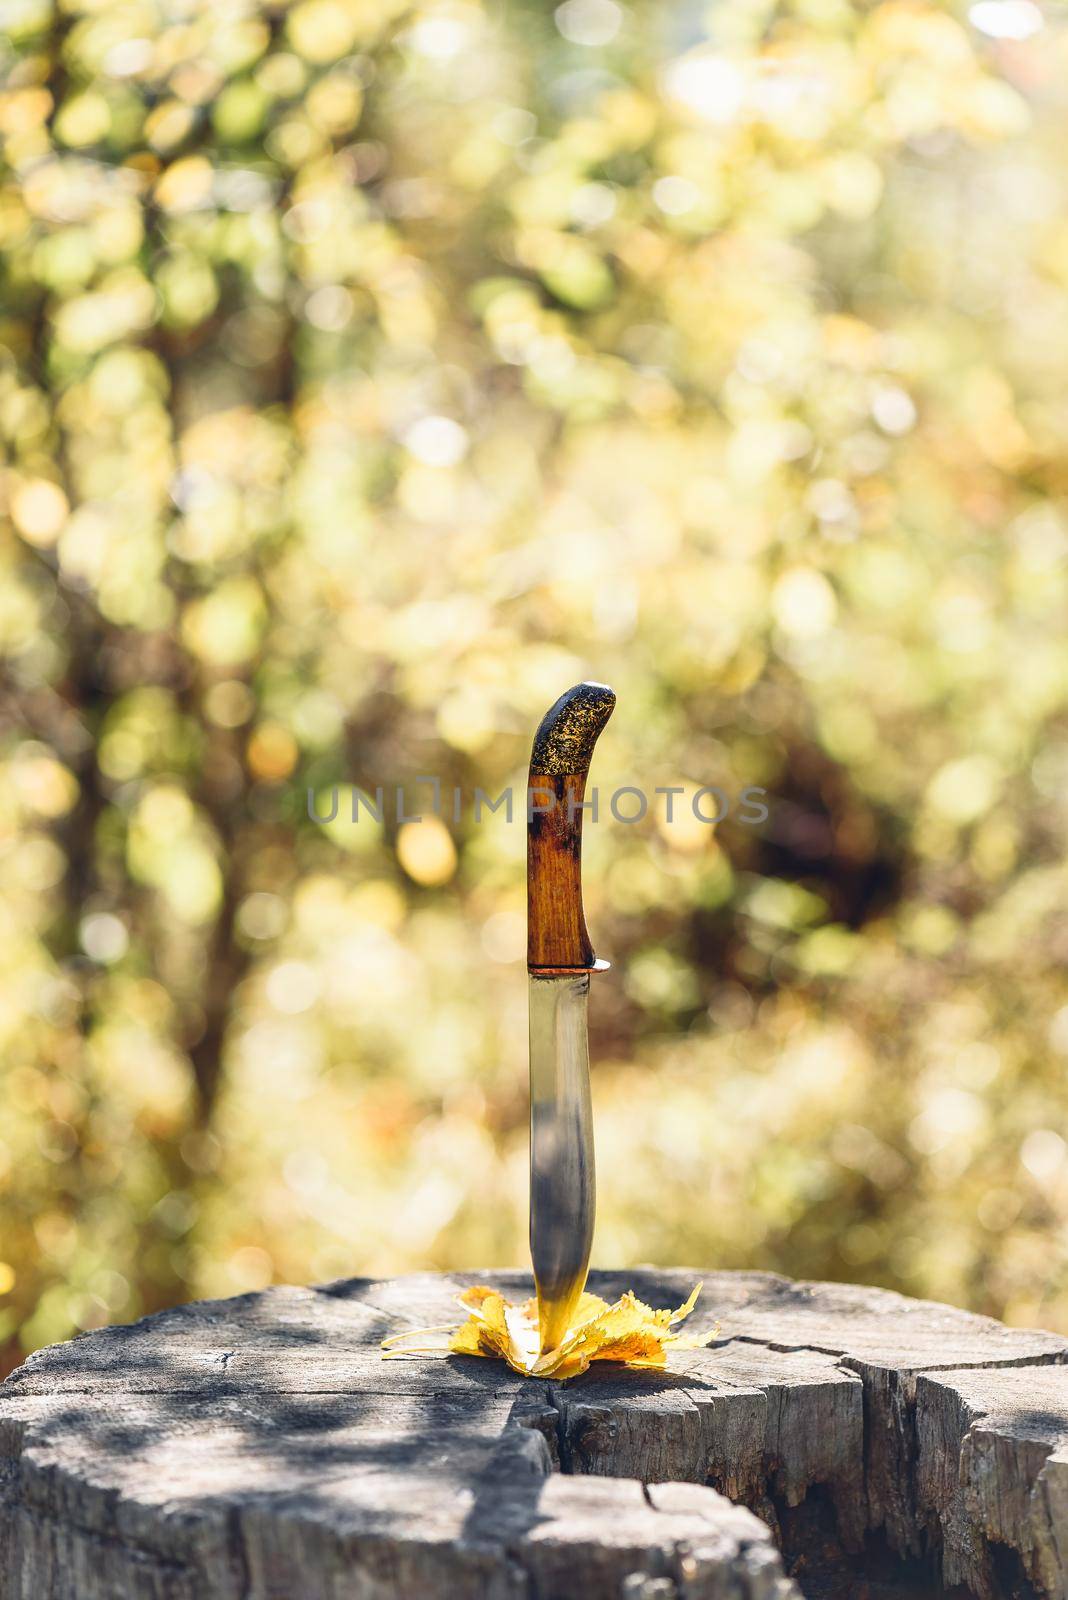 Knife stabbed in the yellow leaves and old stump by Seva_blsv